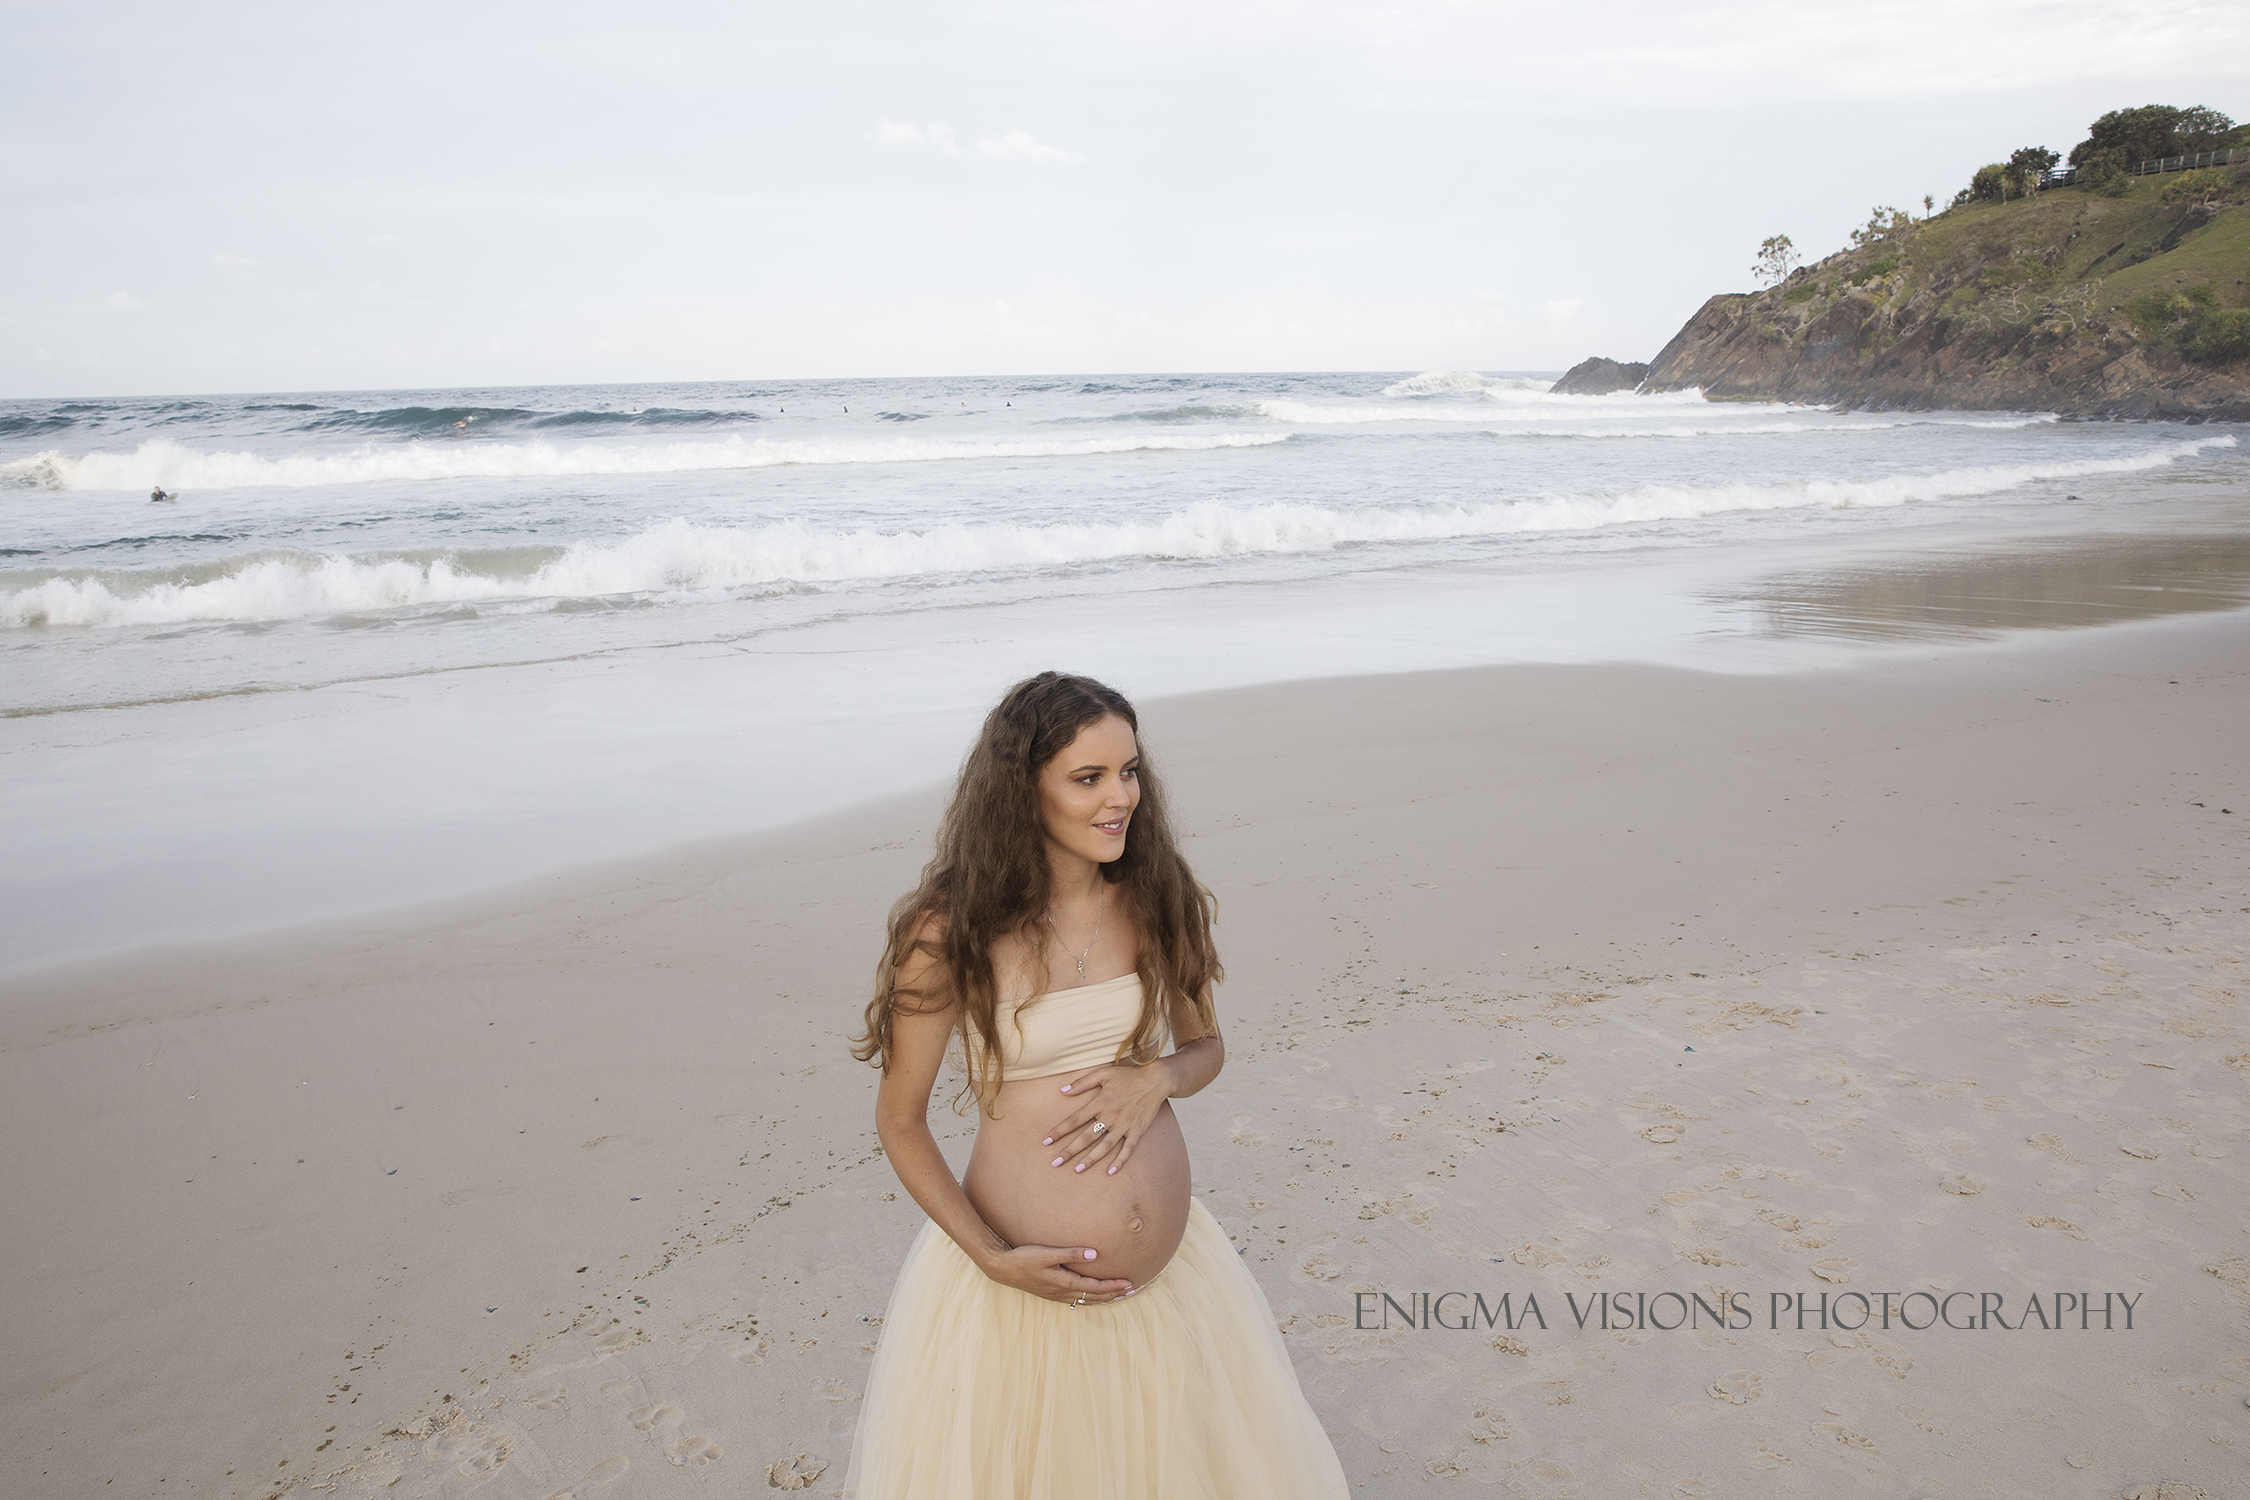 Enigma_Visions_Photography_Maternity_Mahlea022.jpg